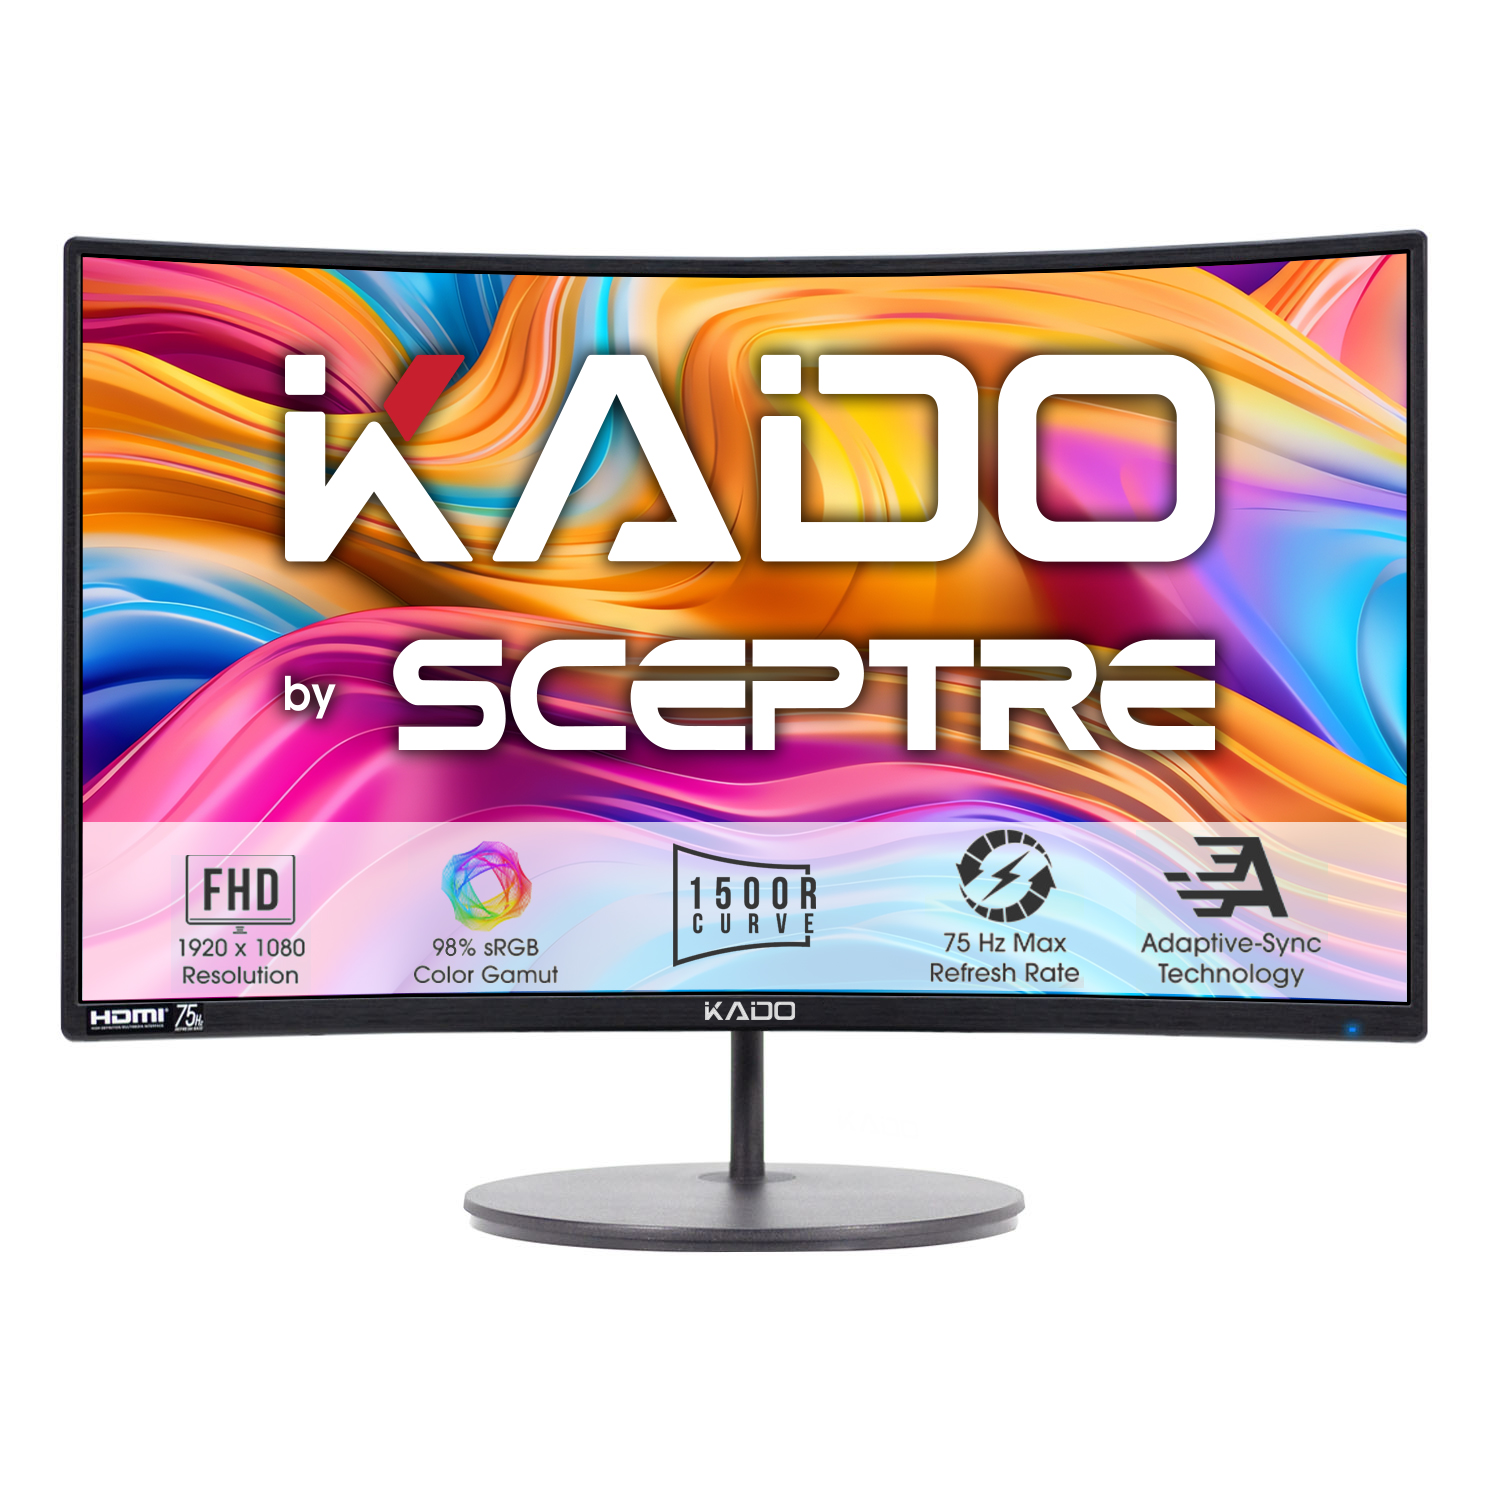 

Kado By Sceptre Curved 24" Computer Monitor Gaming Office 1500r 1920x1080 Hd 75hz Vga Built-in Speakers Wall Mount Ready Black